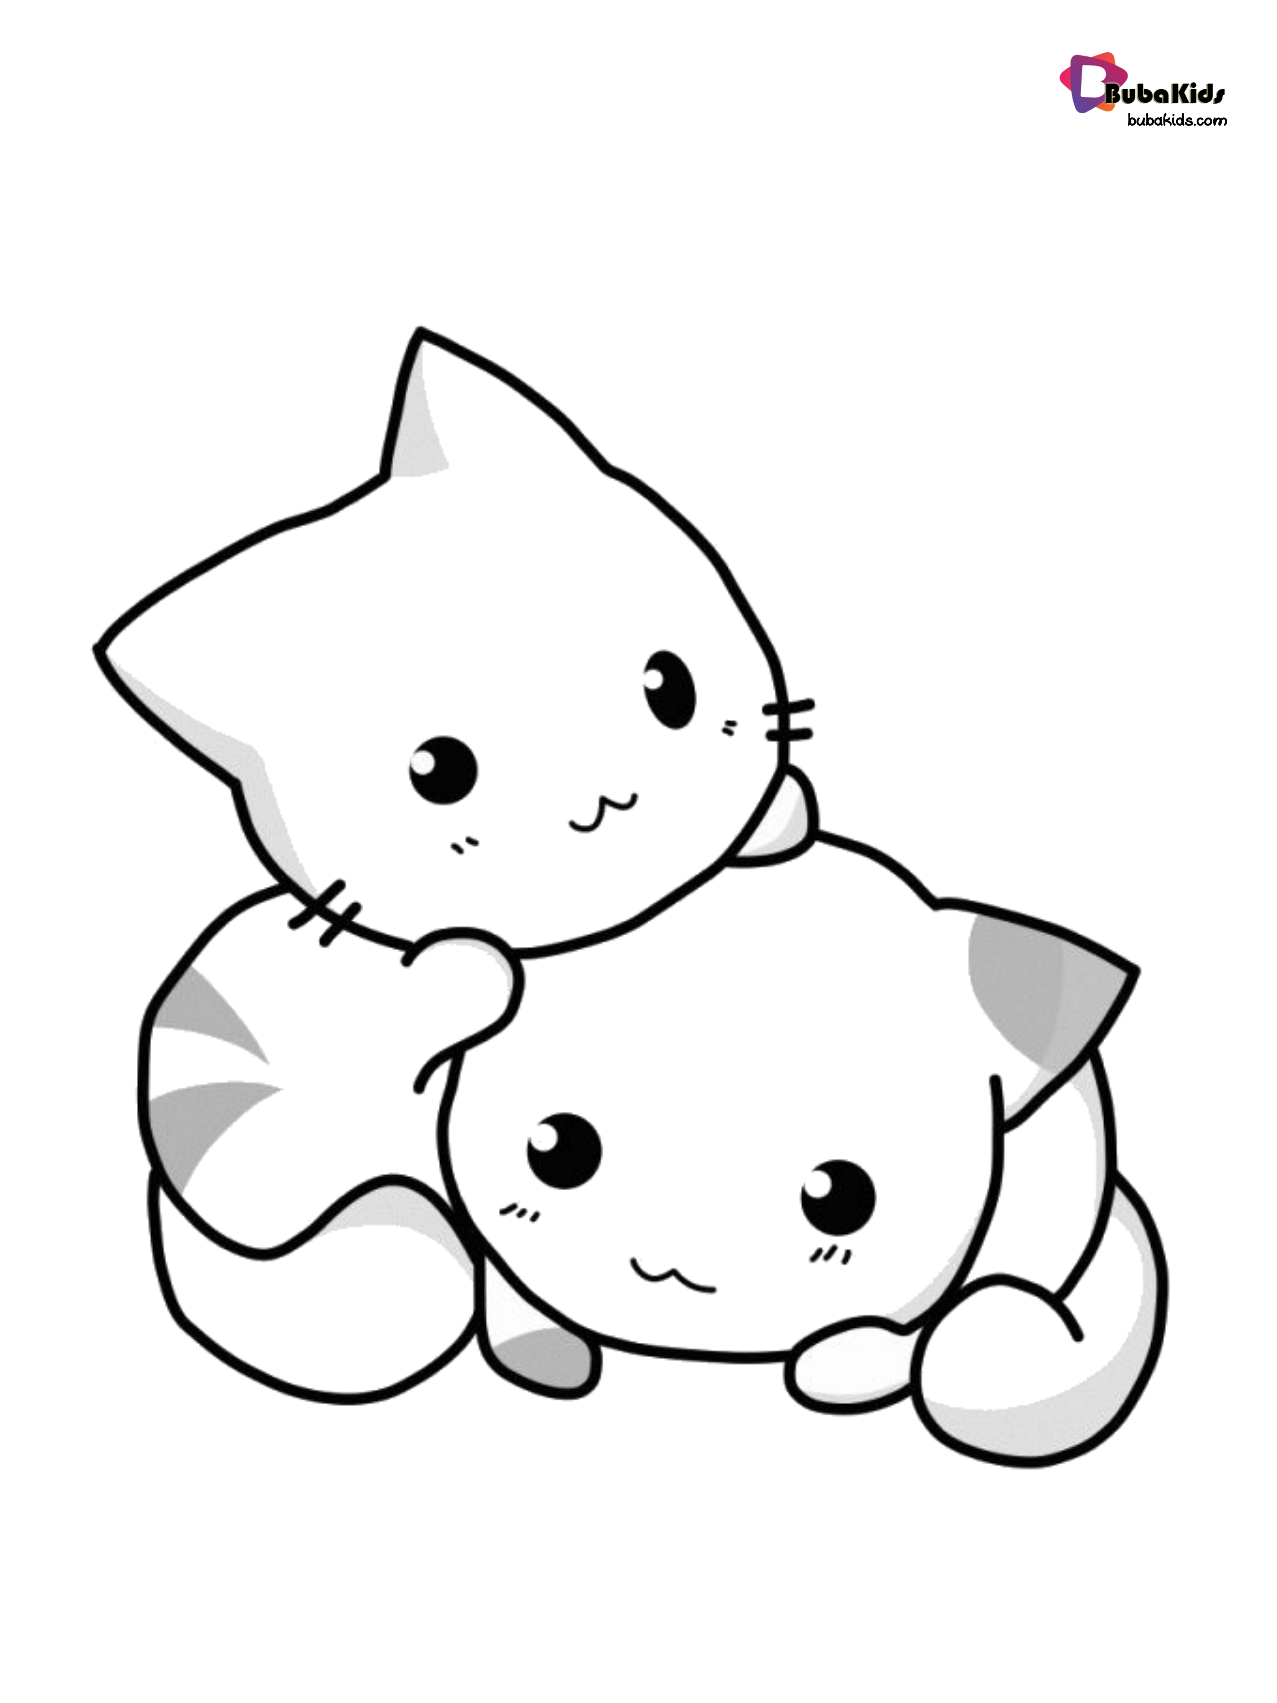 cute-kittens-coloring-pages-bubakids